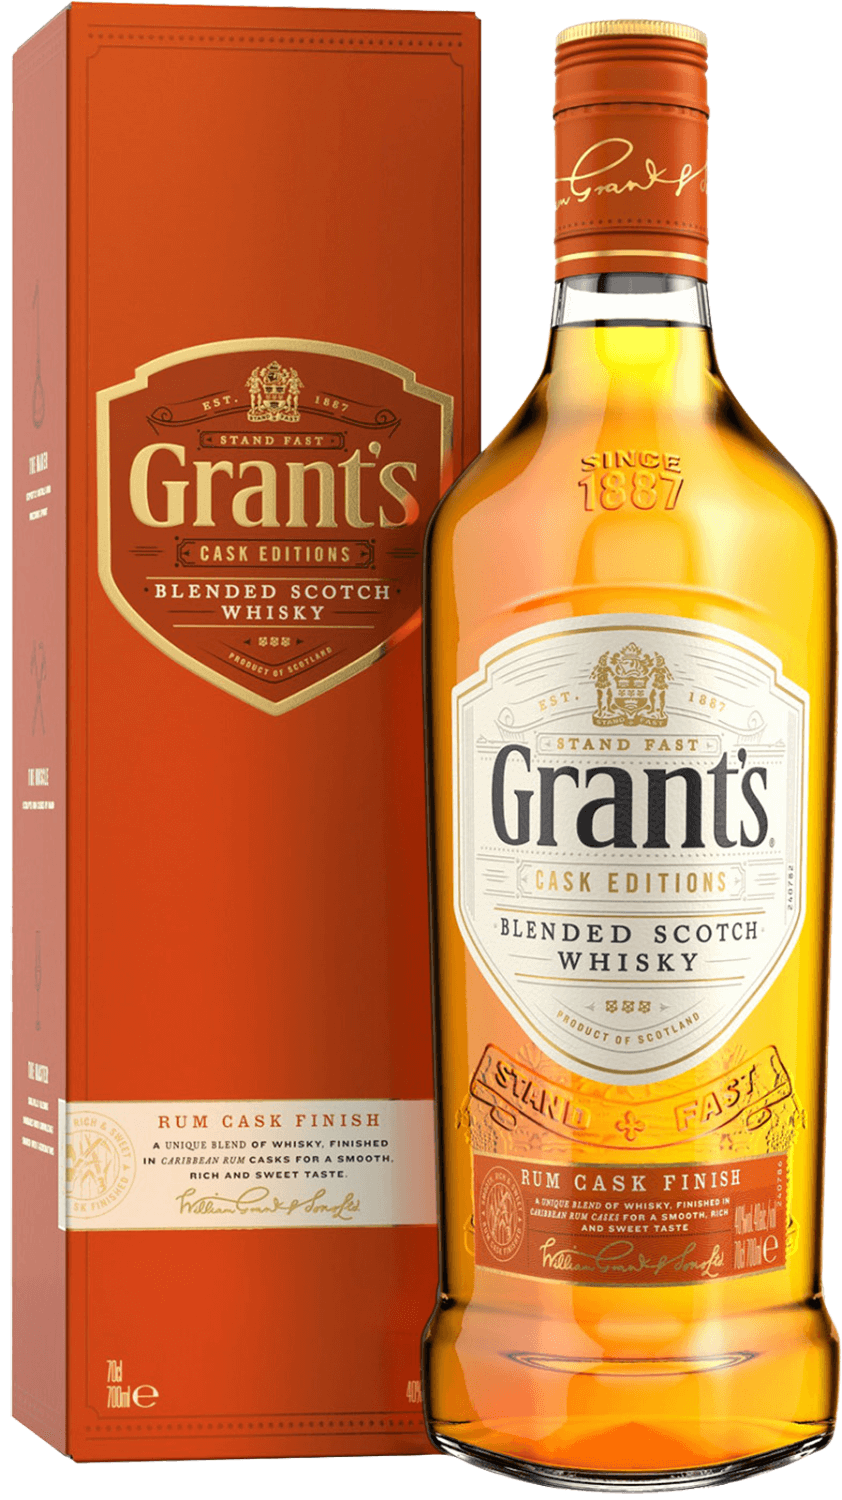 Grant's Ale Cask Finish Blended Scotch Whisky (gift box)